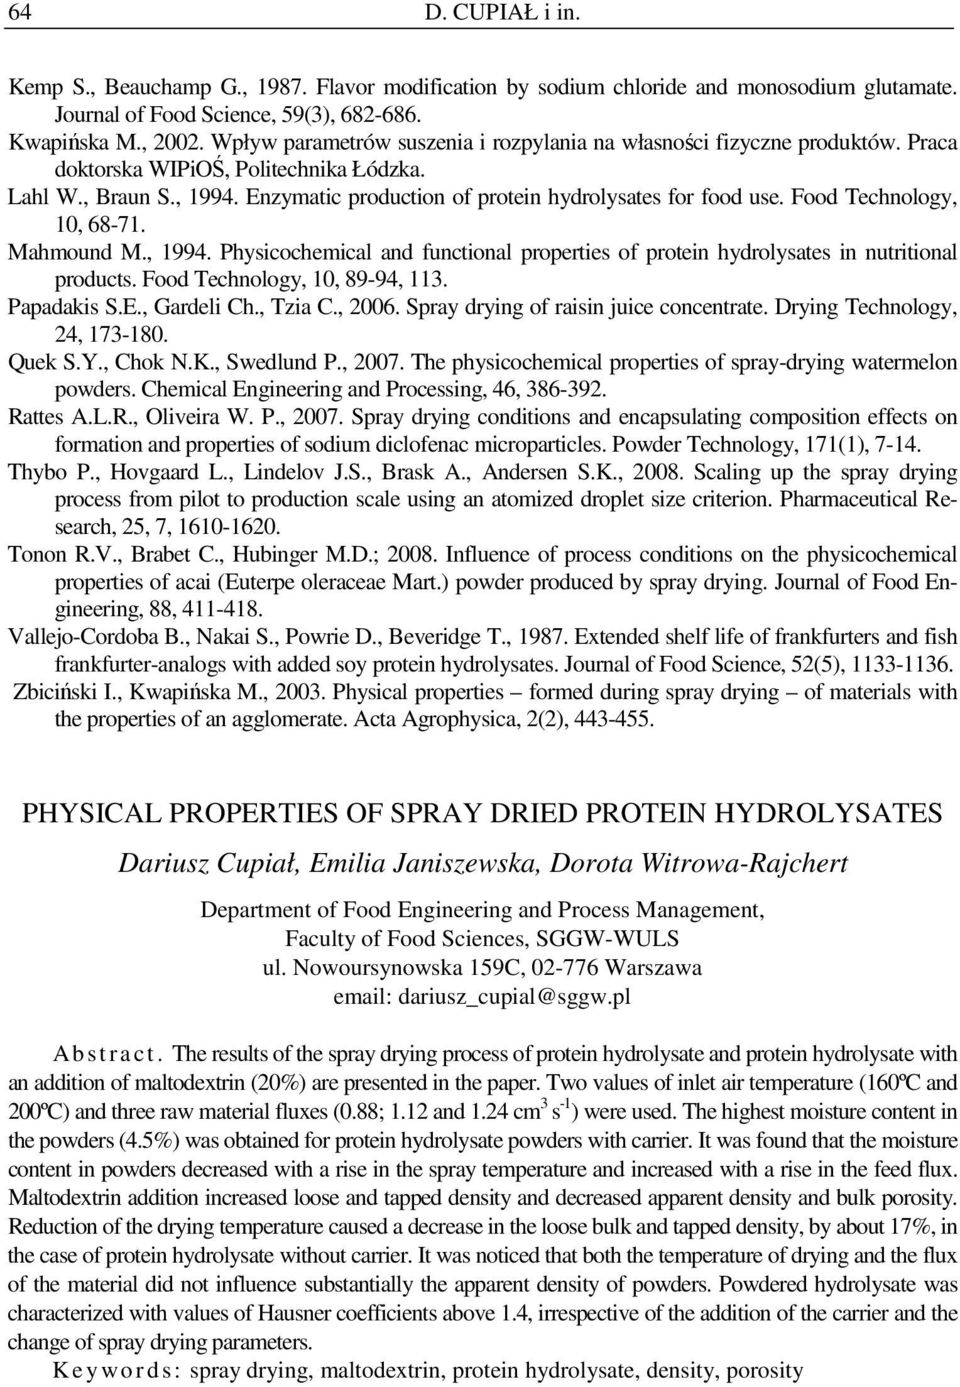 Food Technology, 10, 68-71. Mahmound M., 1994. Physicochemical and functional properties of protein hydrolysates in nutritional products. Food Technology, 10, 89-94, 113. Papadakis S.E., Gardeli Ch.